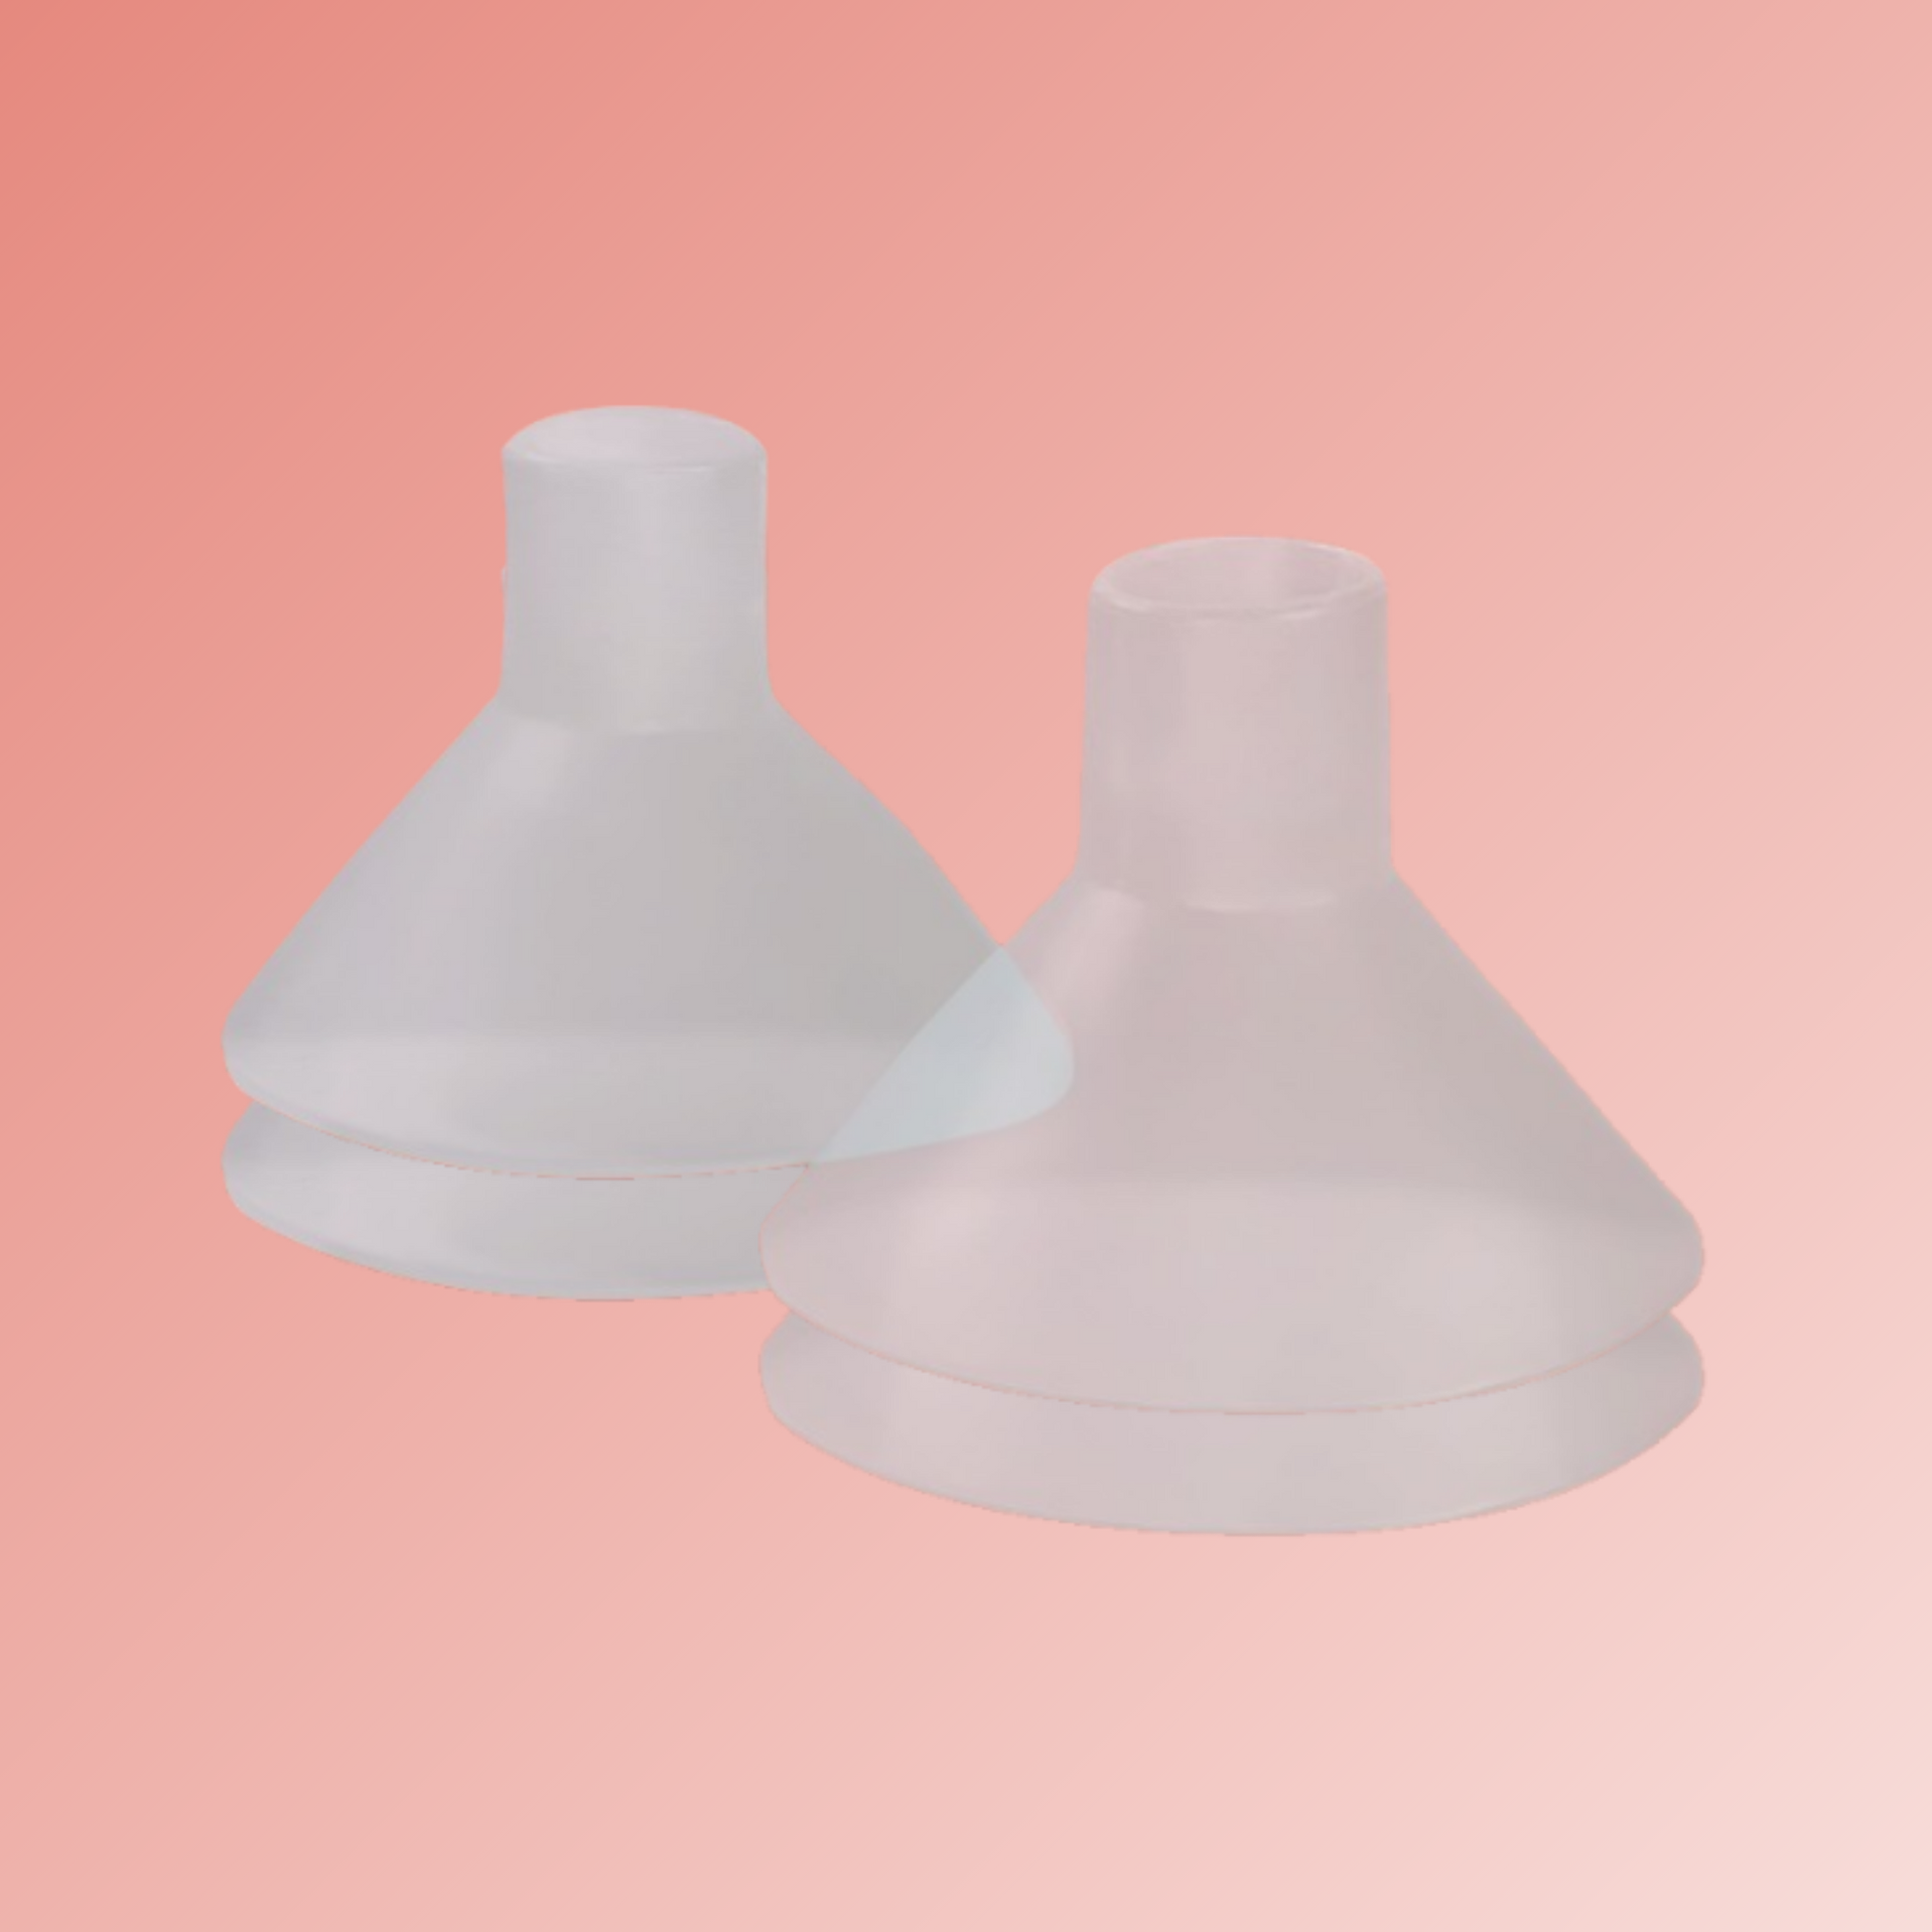 Take the pain out of pumping and get a better flange fit with the Clearly Comfy Cushions from BeauGen. Save time and money by purchasing two pairs of breast pump cushions here.